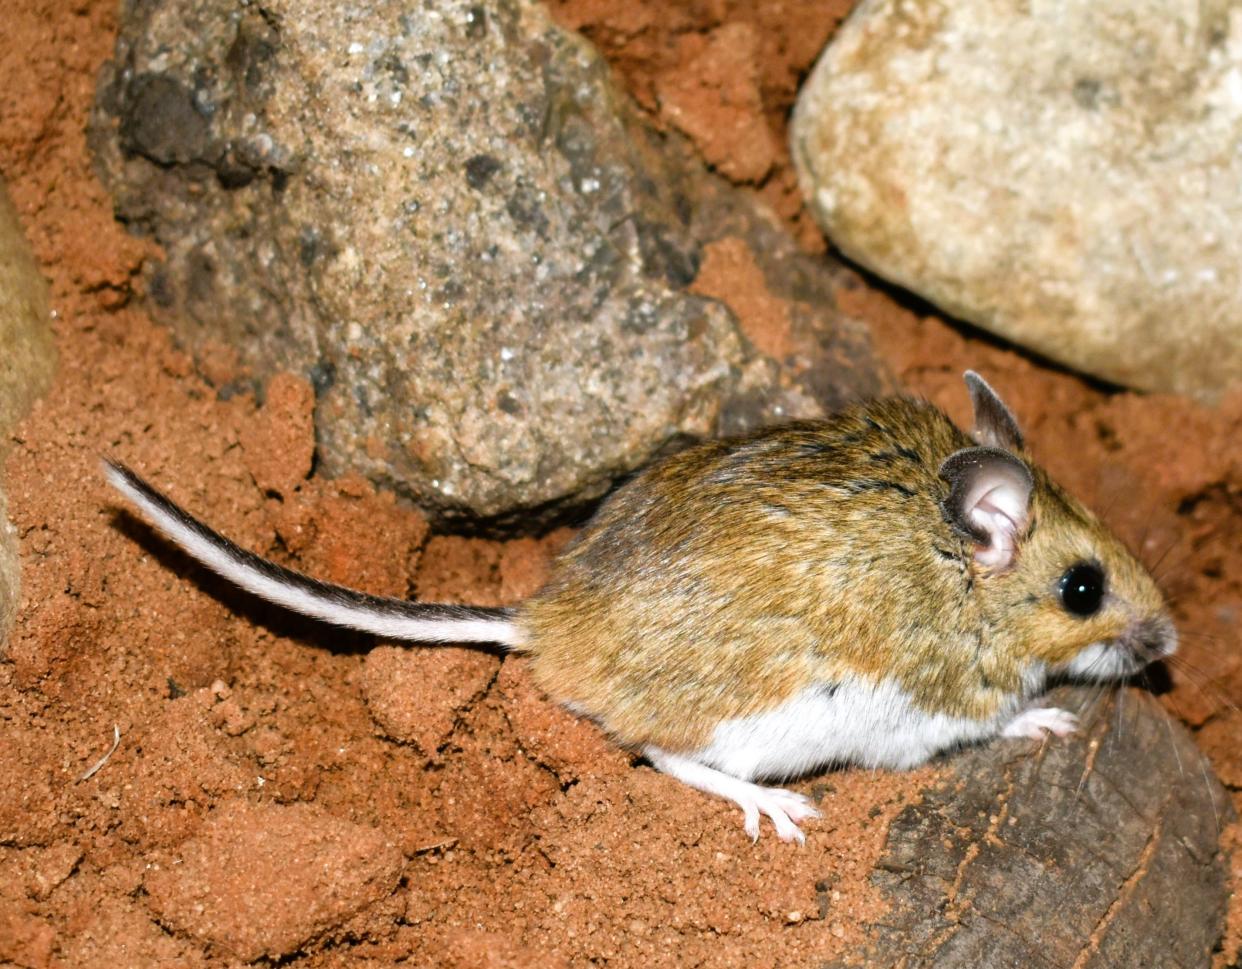 This is the North American deer mouse, Peromyscus sonoriensis.